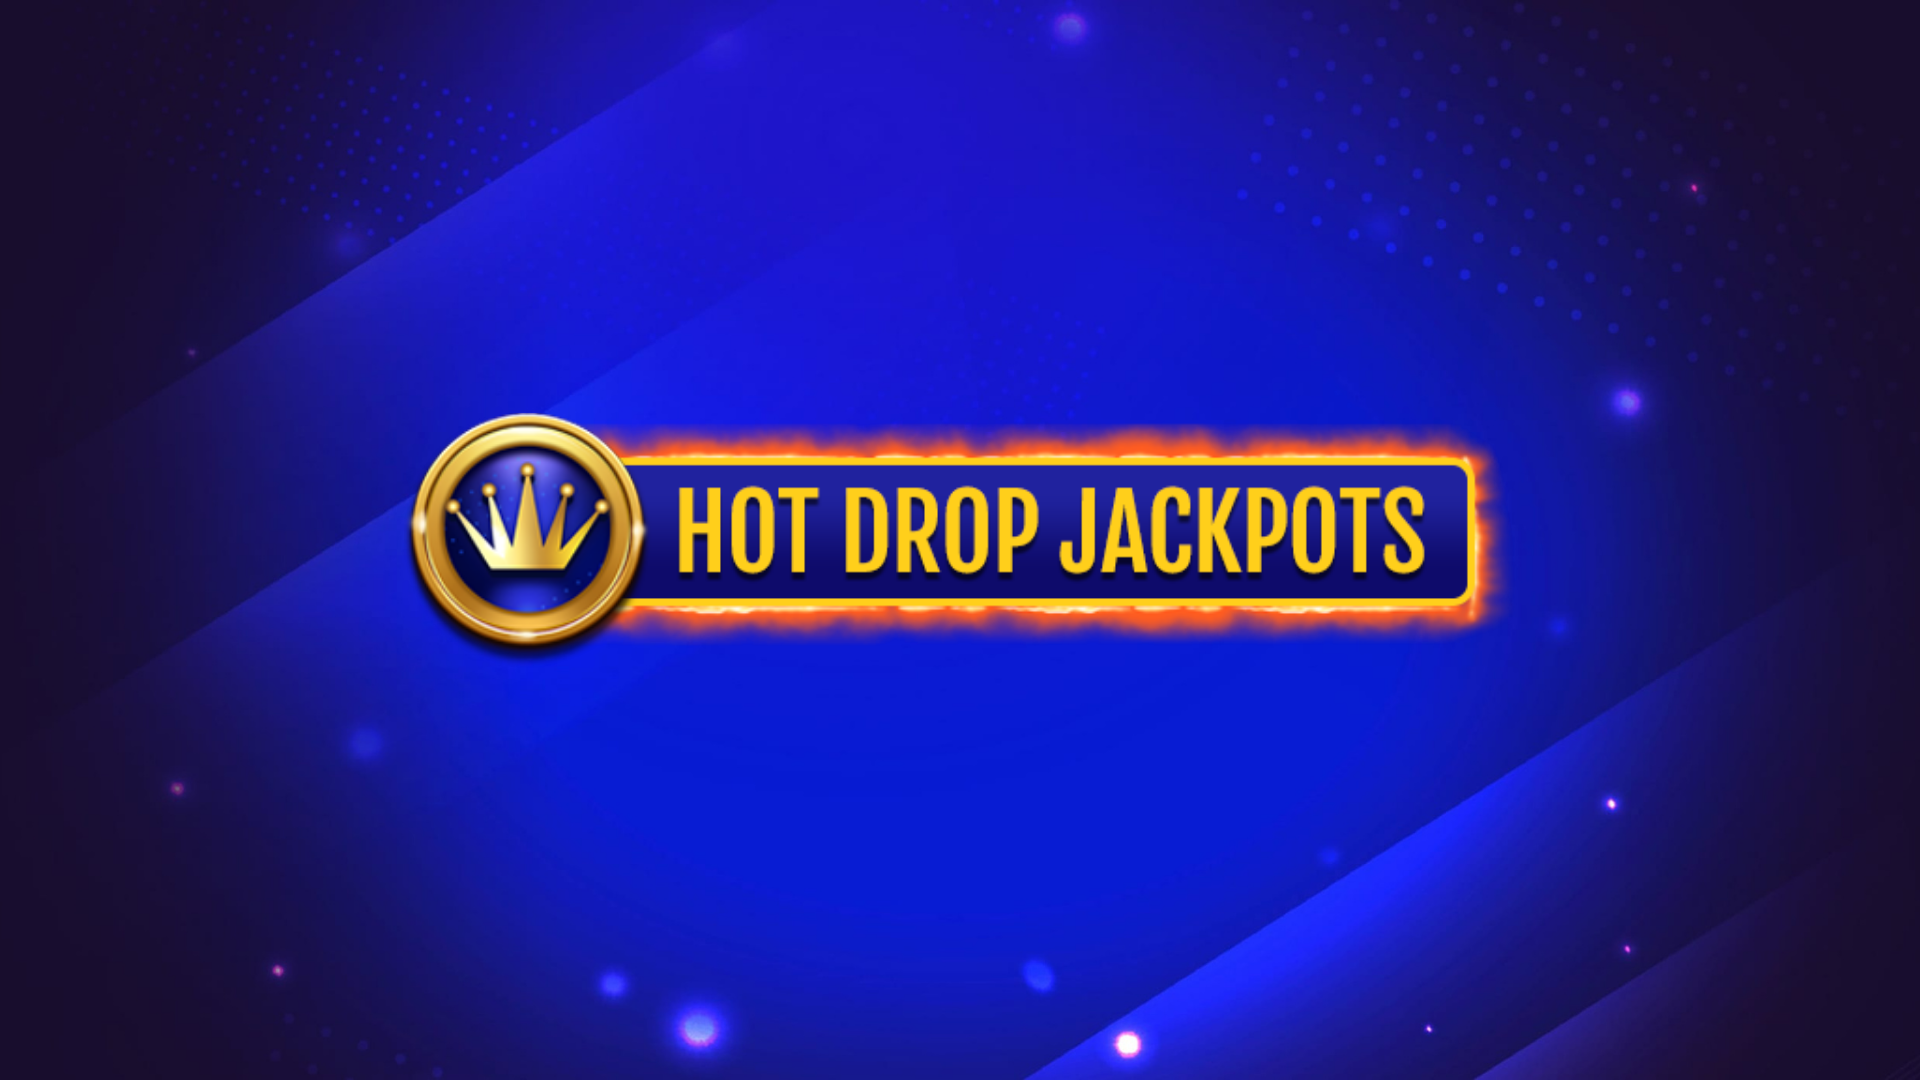 What Are Hot Drop Jackpots?